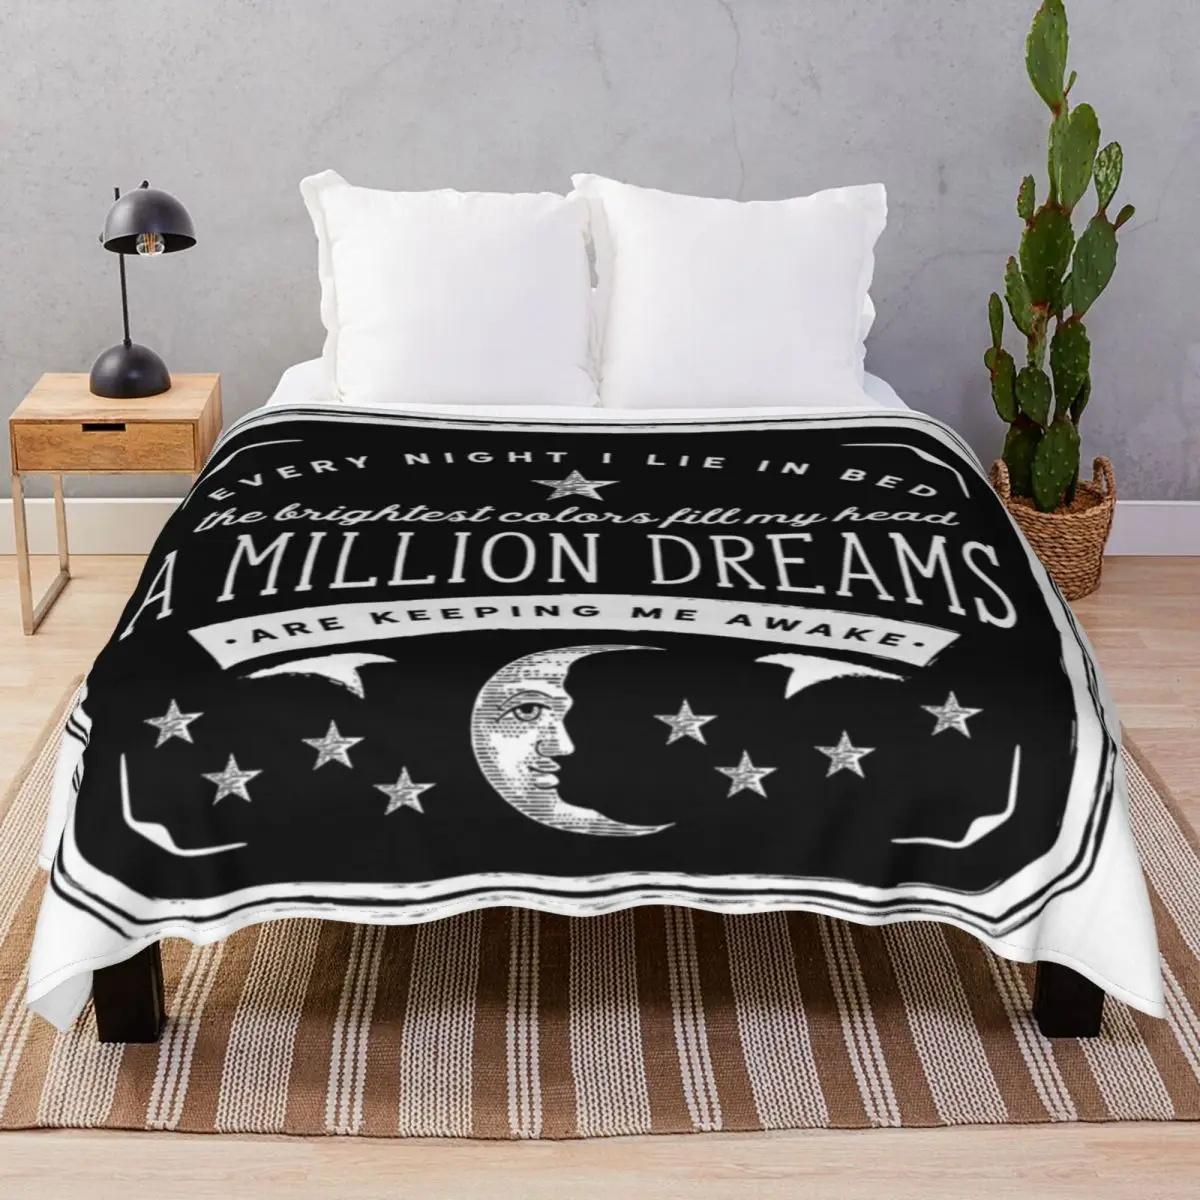 A Million Dreams Blankets Flannel Autumn Super Warm Throw Blanket for Bed Home Couch Travel Office